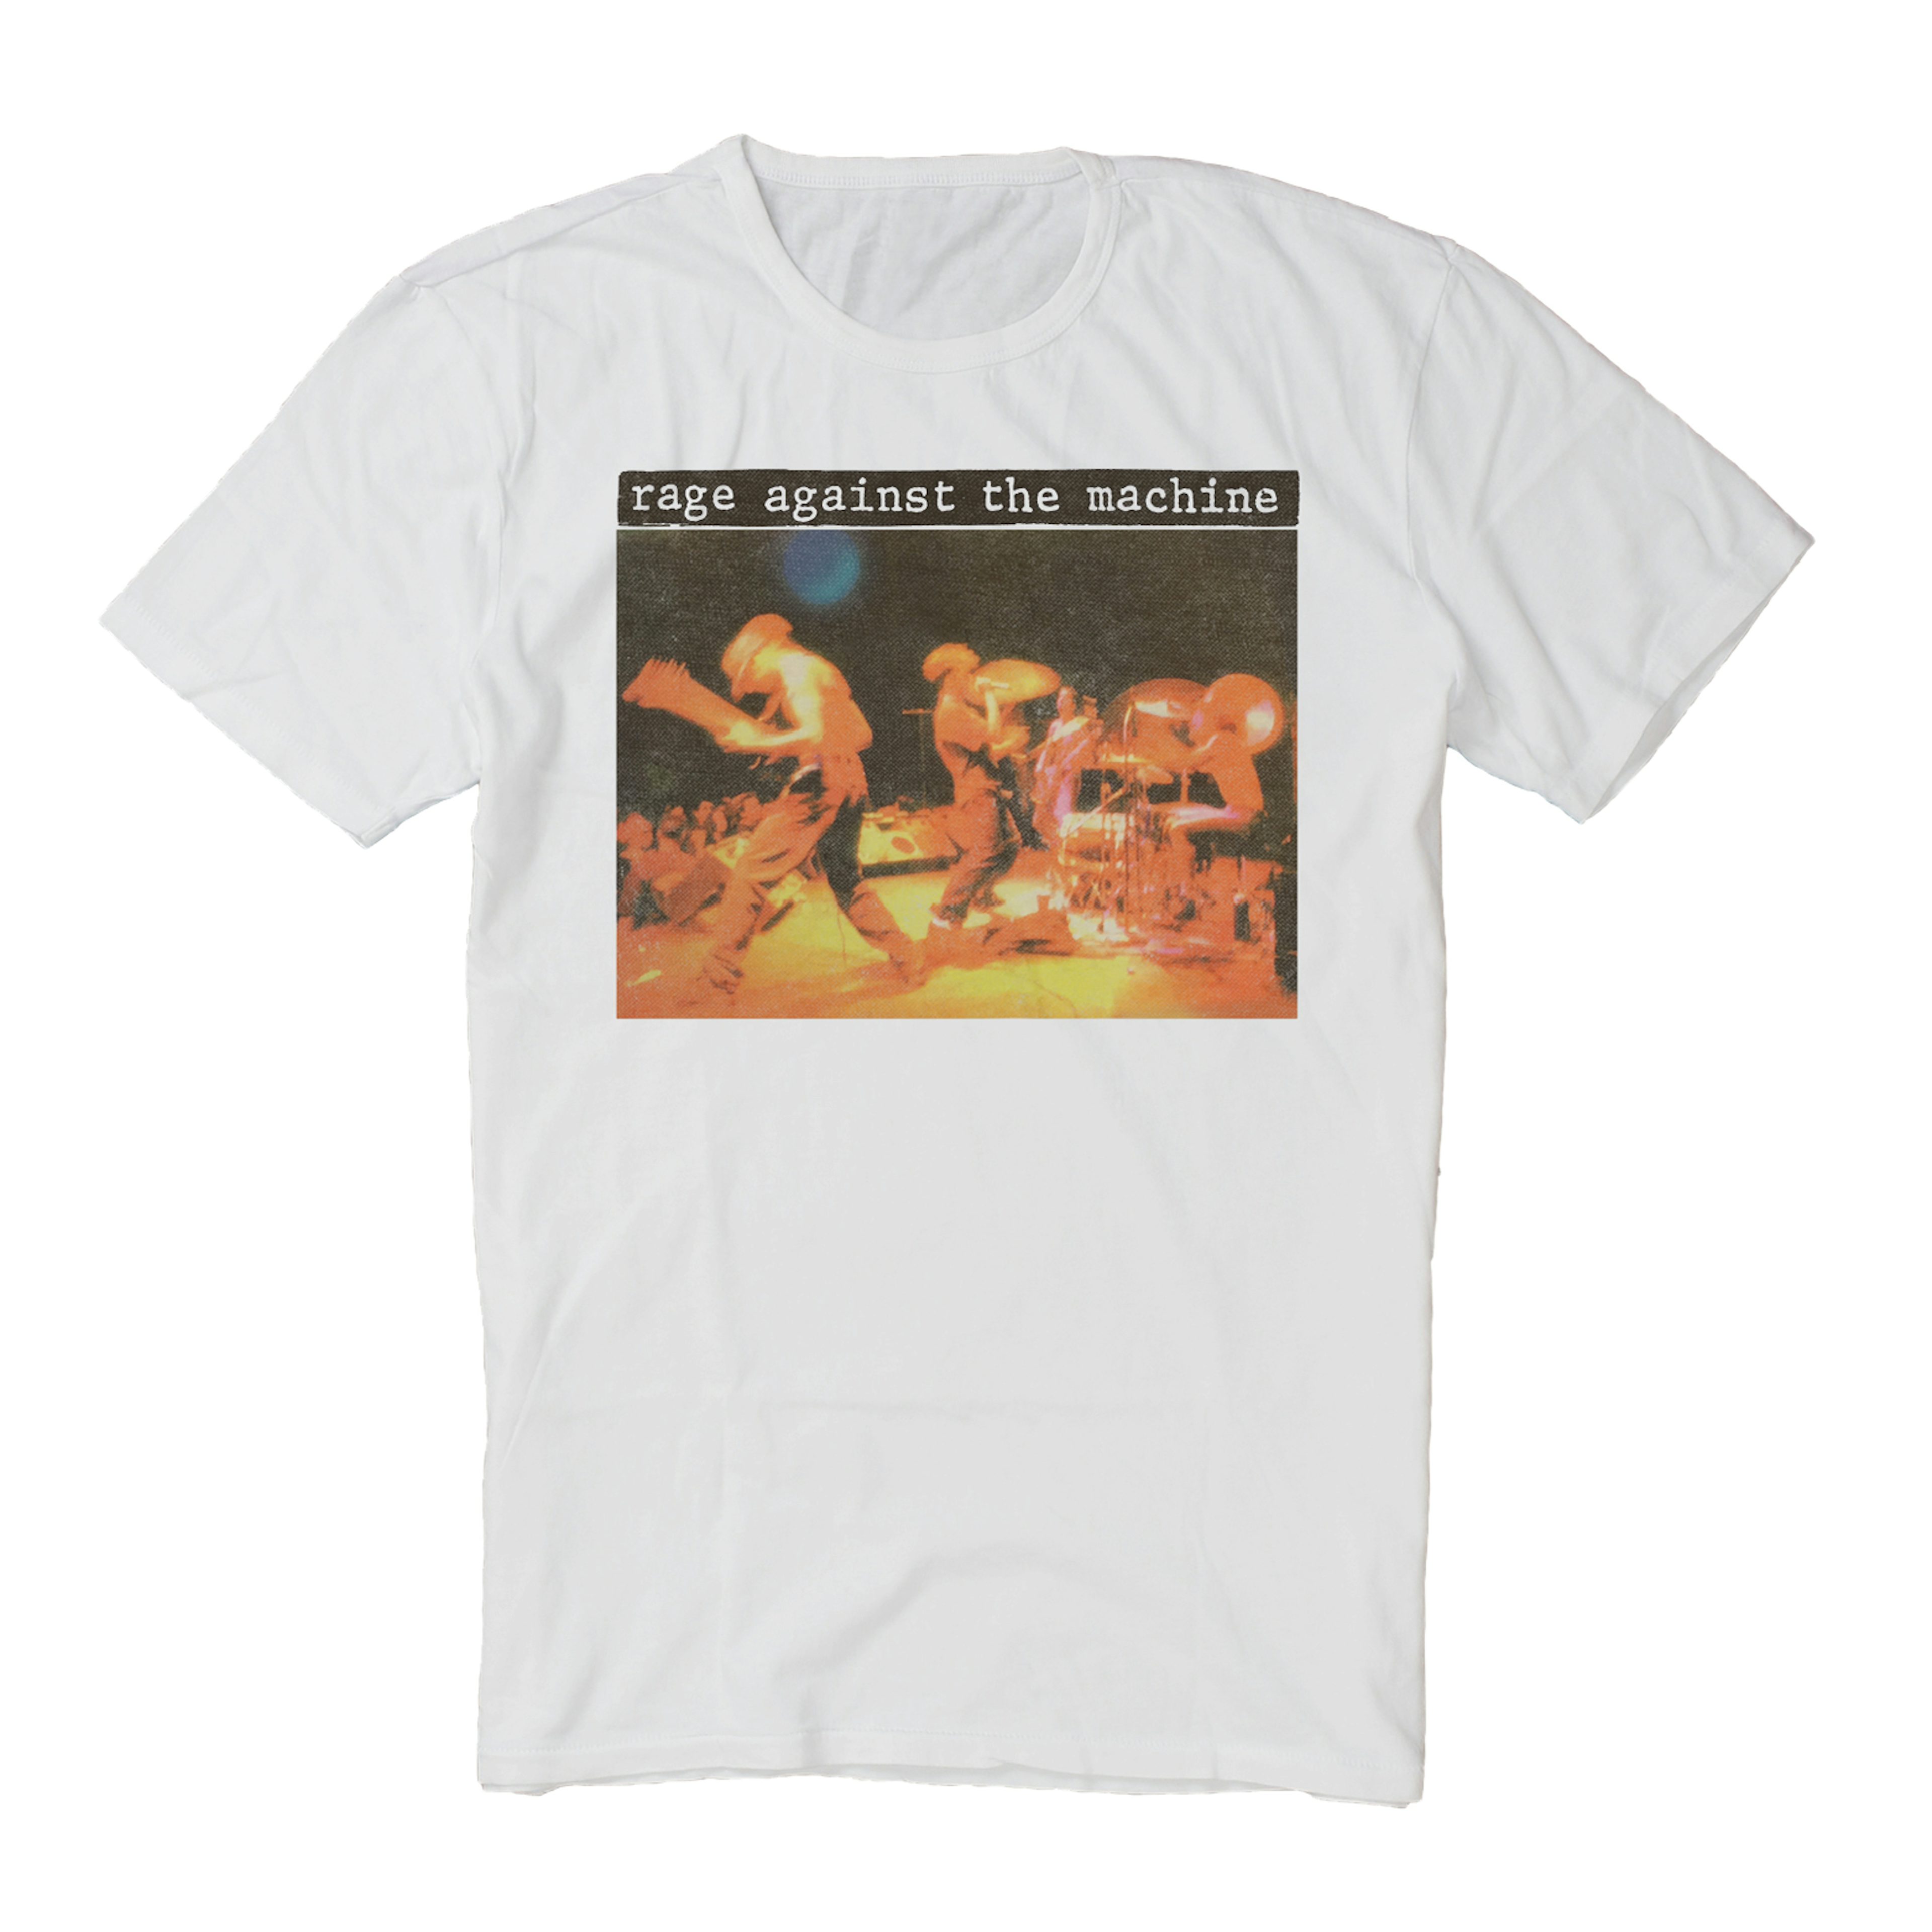 Rage Against The Machine Live Anger Photo Tee (White Vintage Wash)